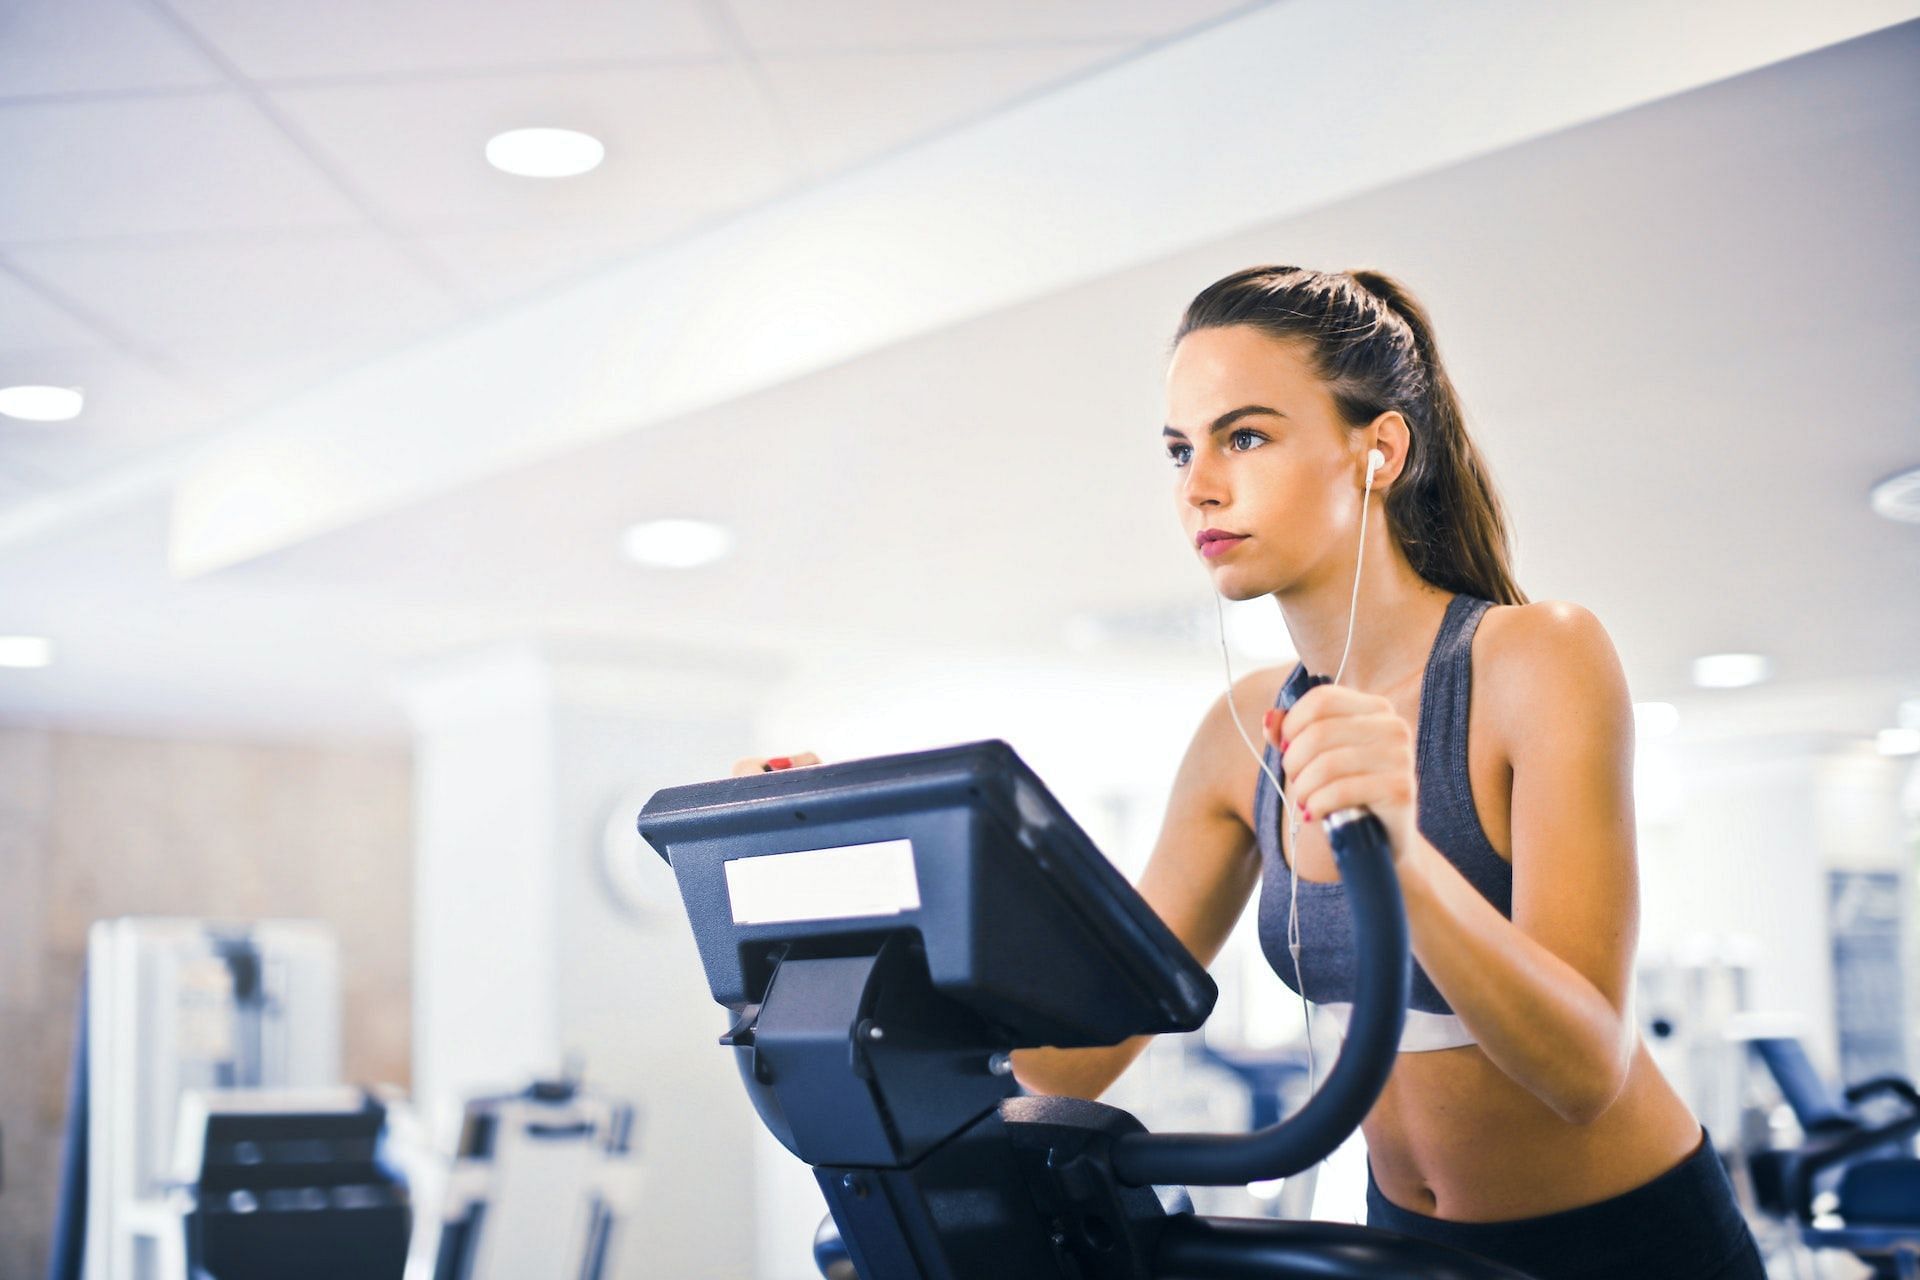 Calorie-burning workouts can help build your muscle endurance and bone density. (Photo via Pexels/Andrea Piacquadio)